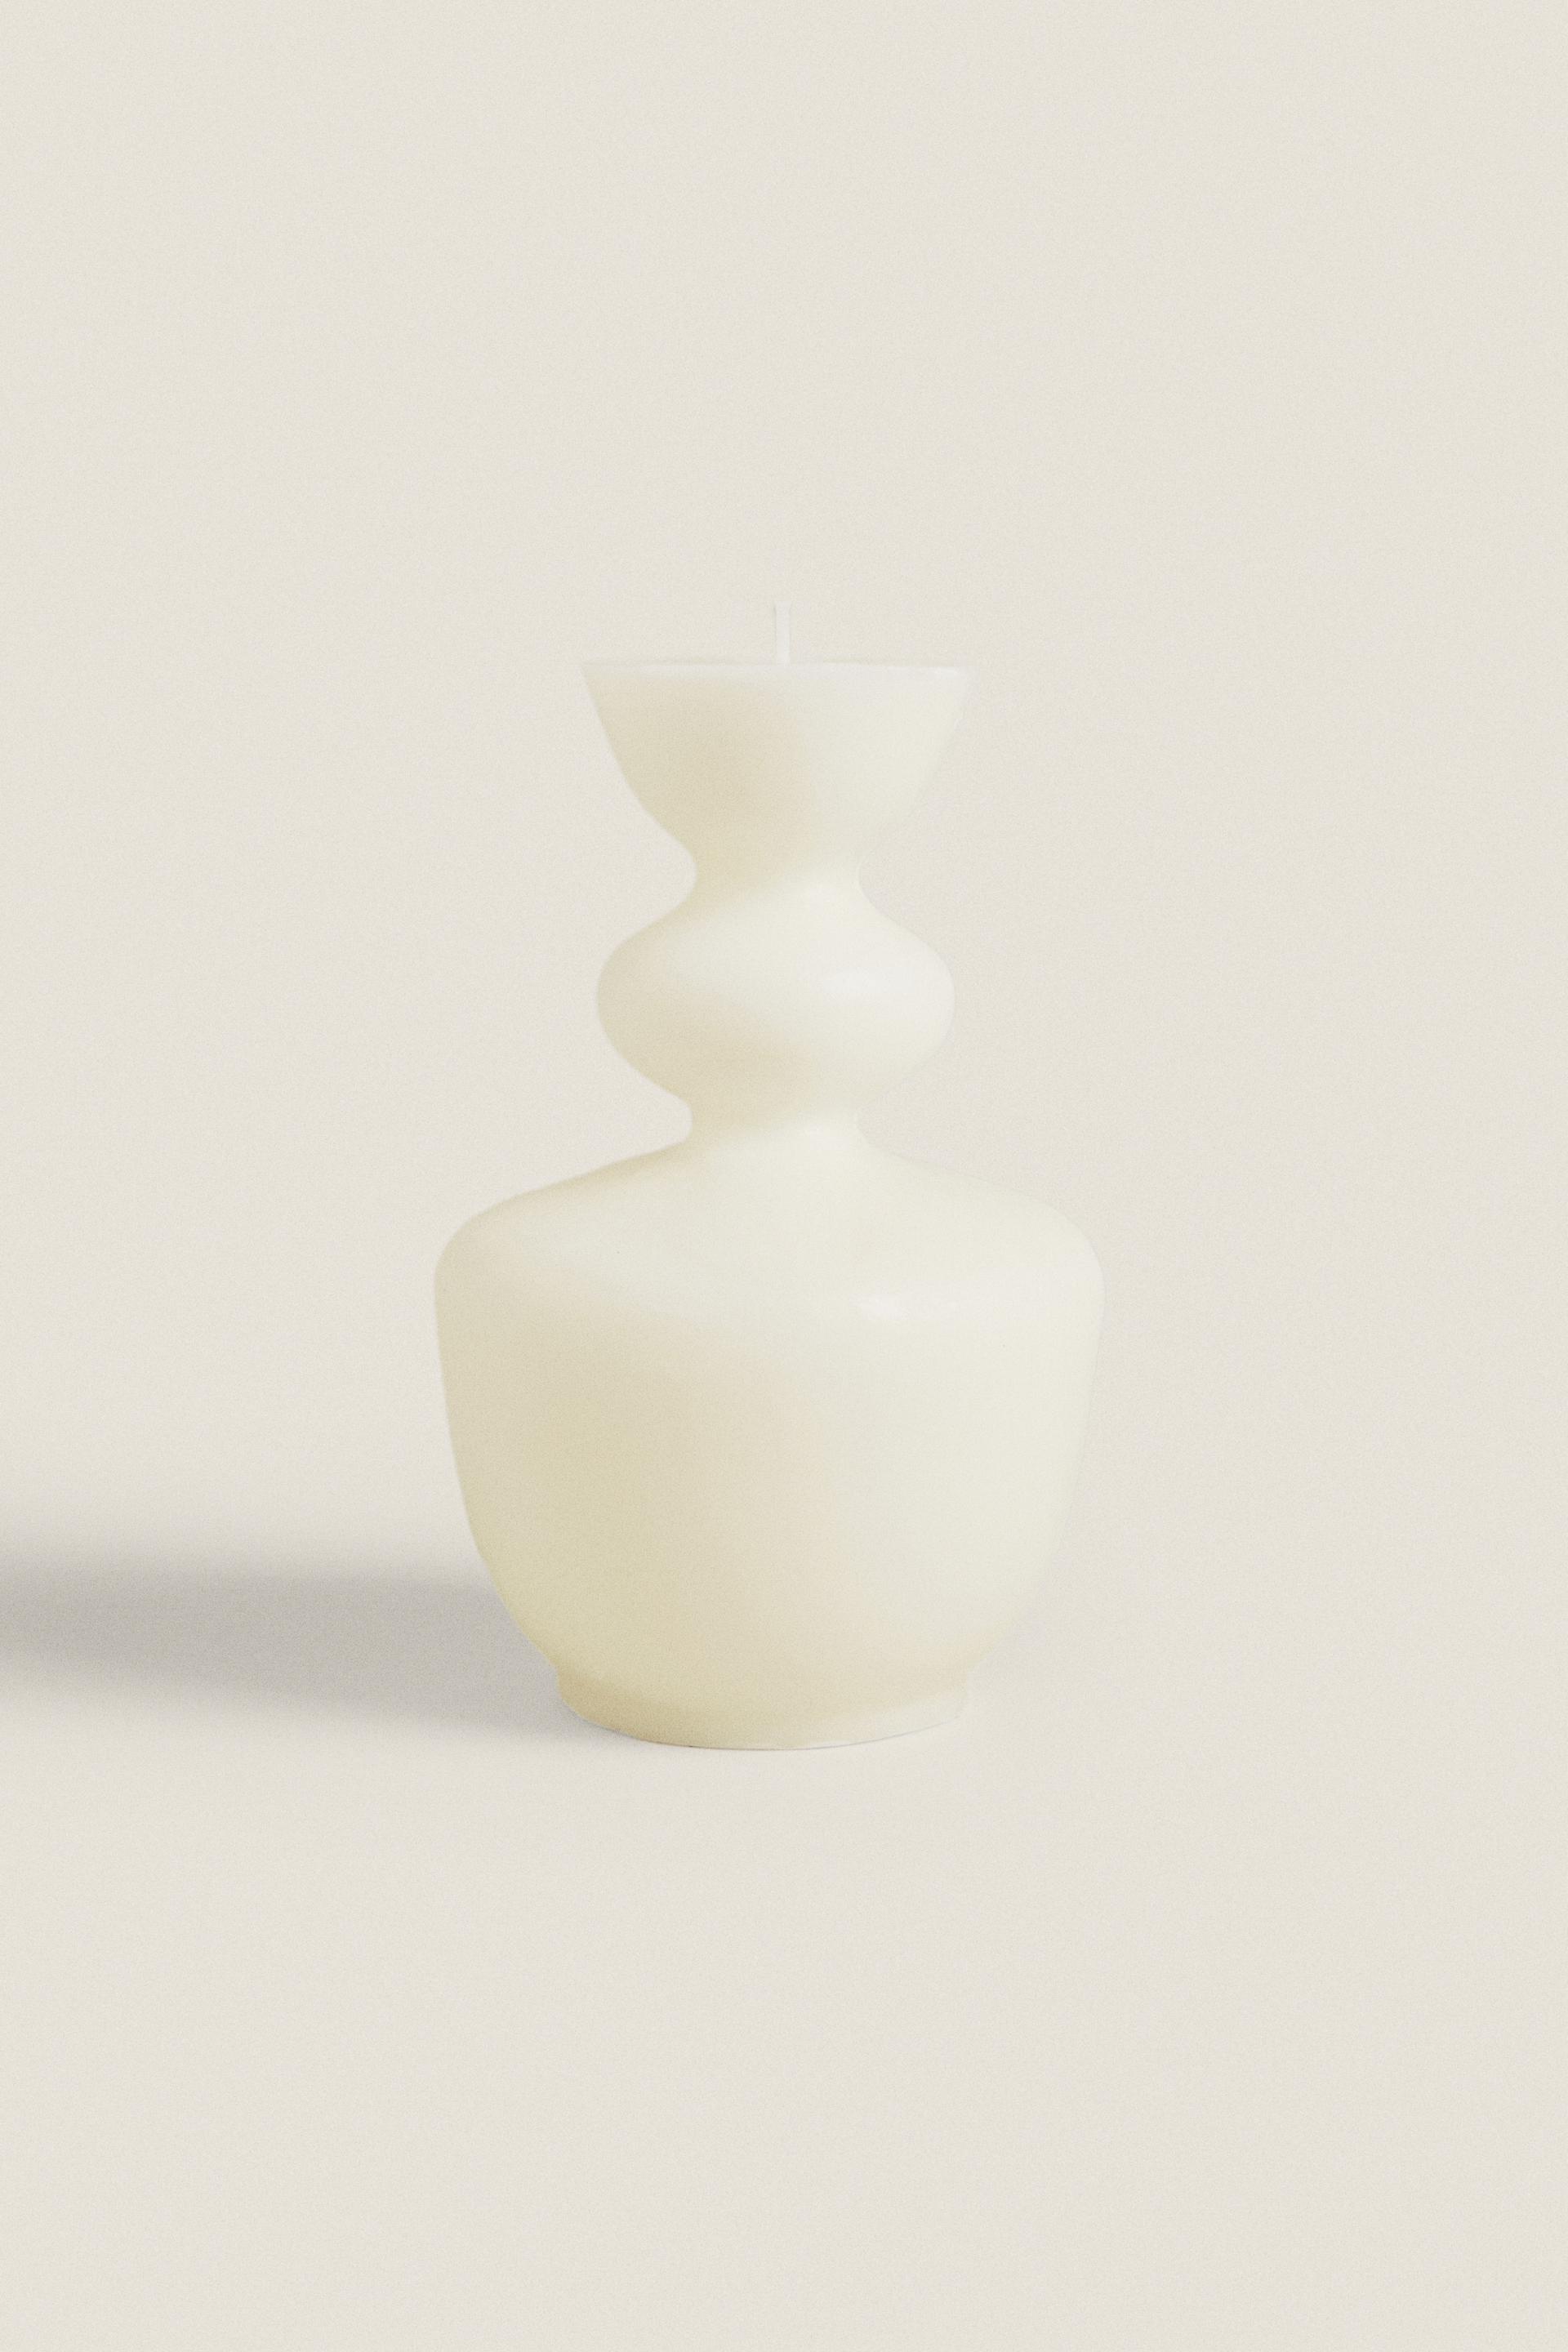 (465 G) WHITE PETALS SCENTED CANDLE CANDLESTICK ZARA